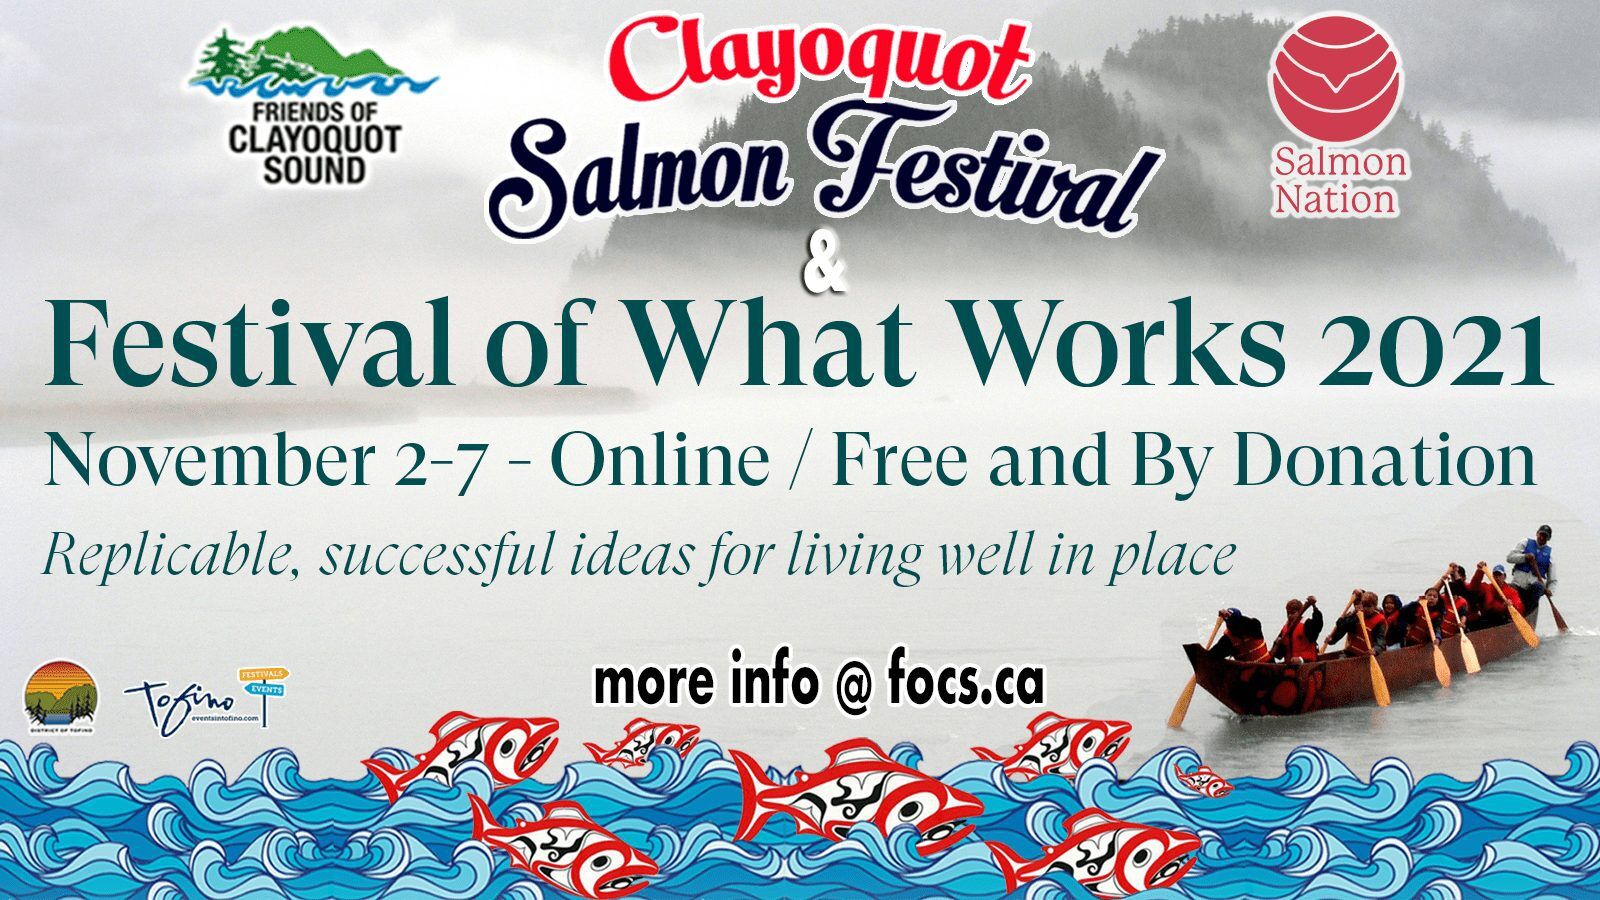 Clayoquot Salmon Festival X The Festival of What Works